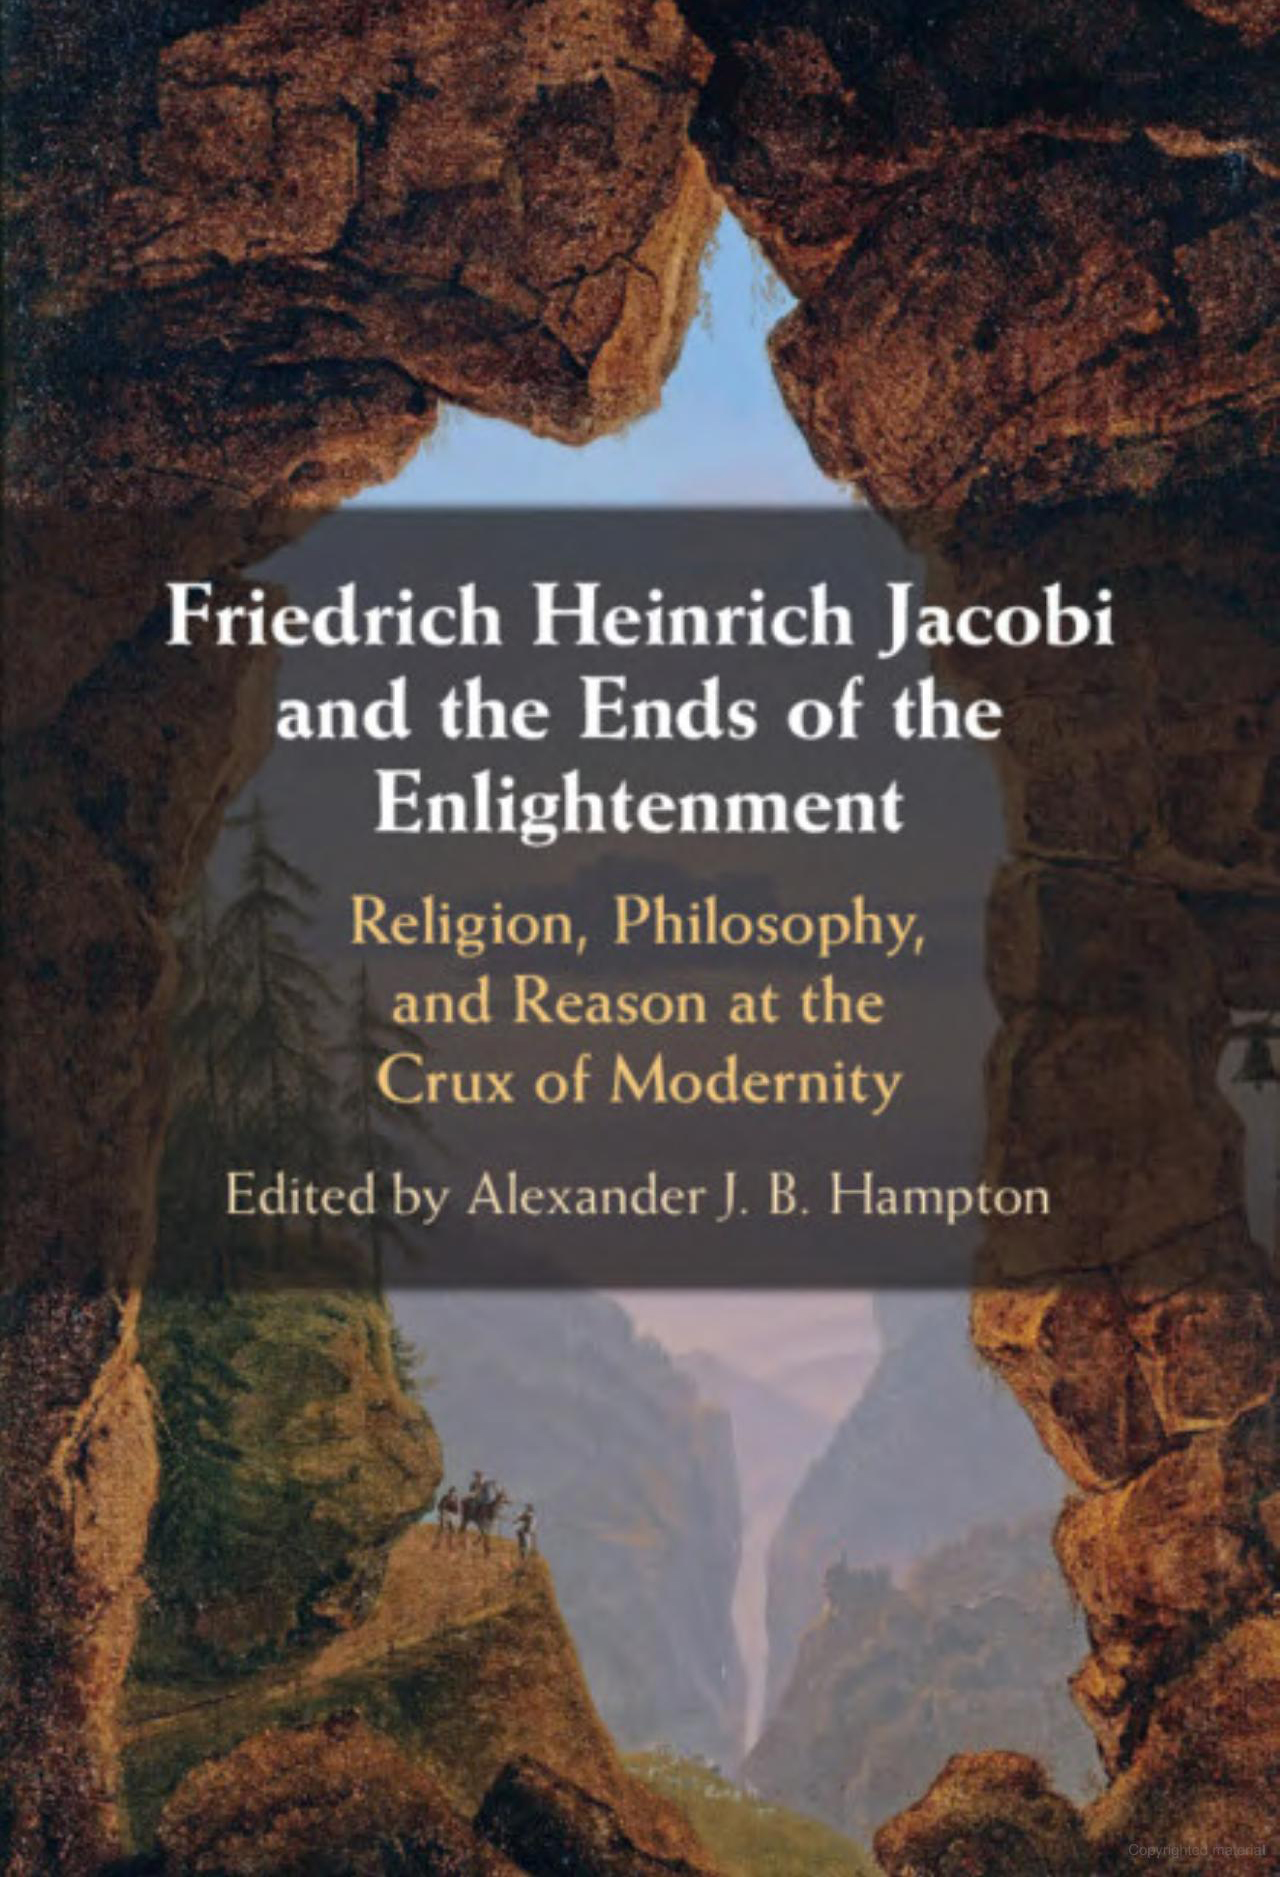 Cover of book, Friedrich Heinrich Jacobi and the Ends of the Enlightenment